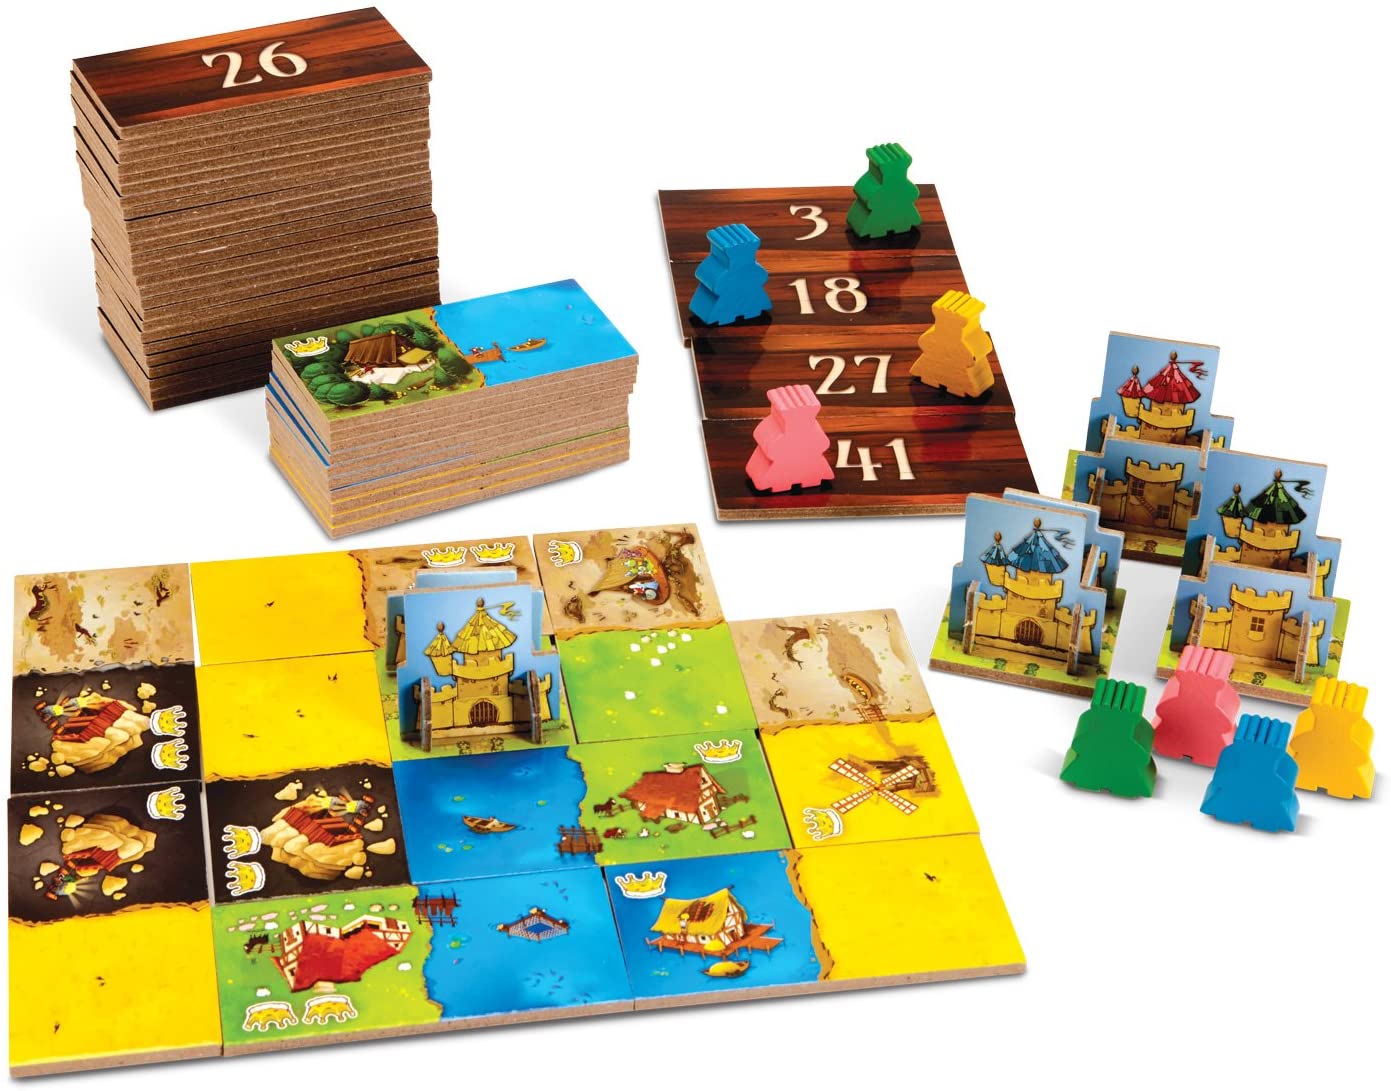 Find out about Kingdomino